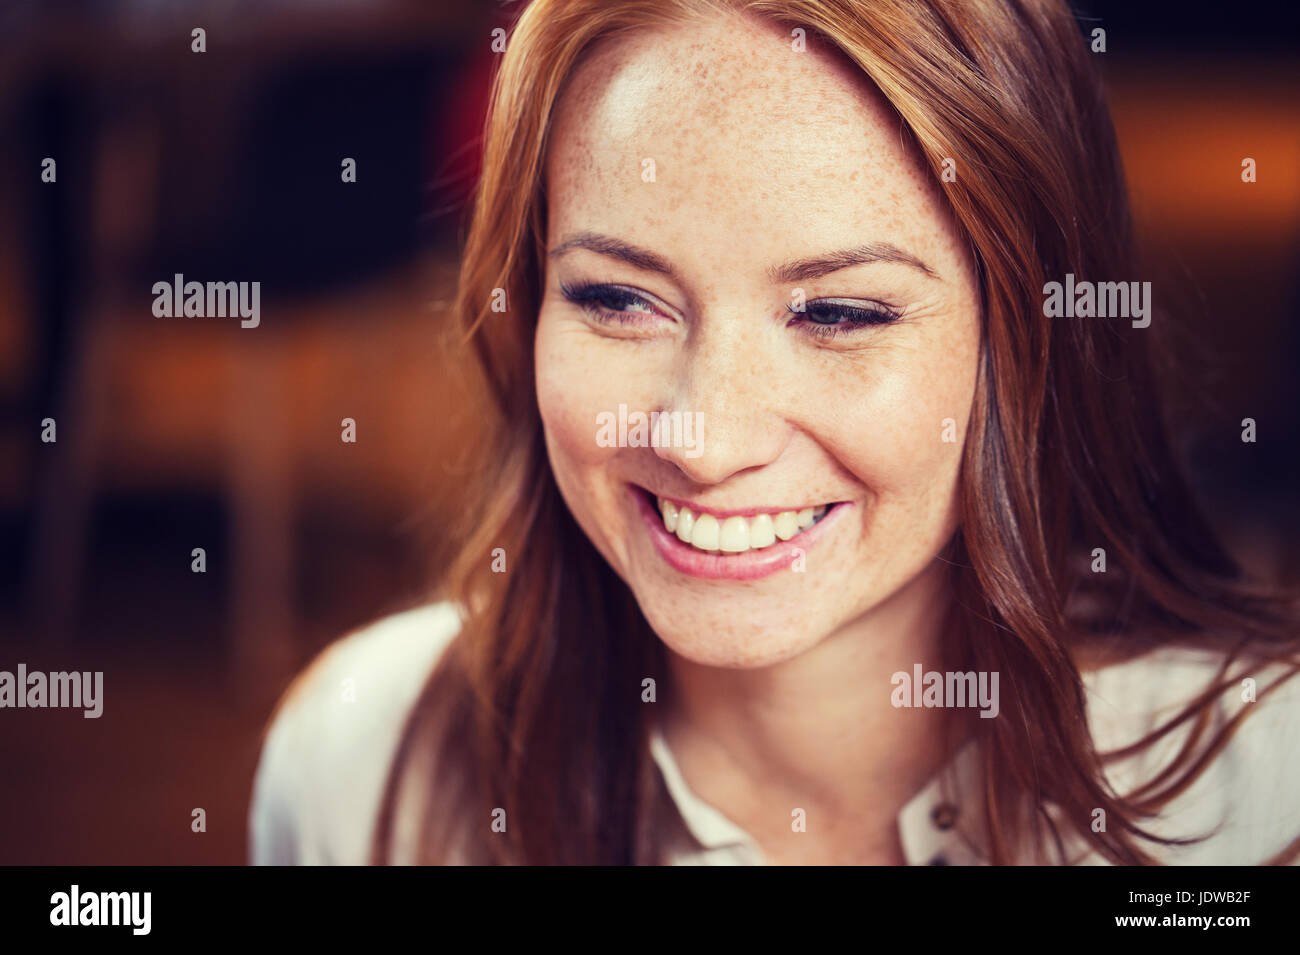 Smiling young redhead woman face Banque D'Images